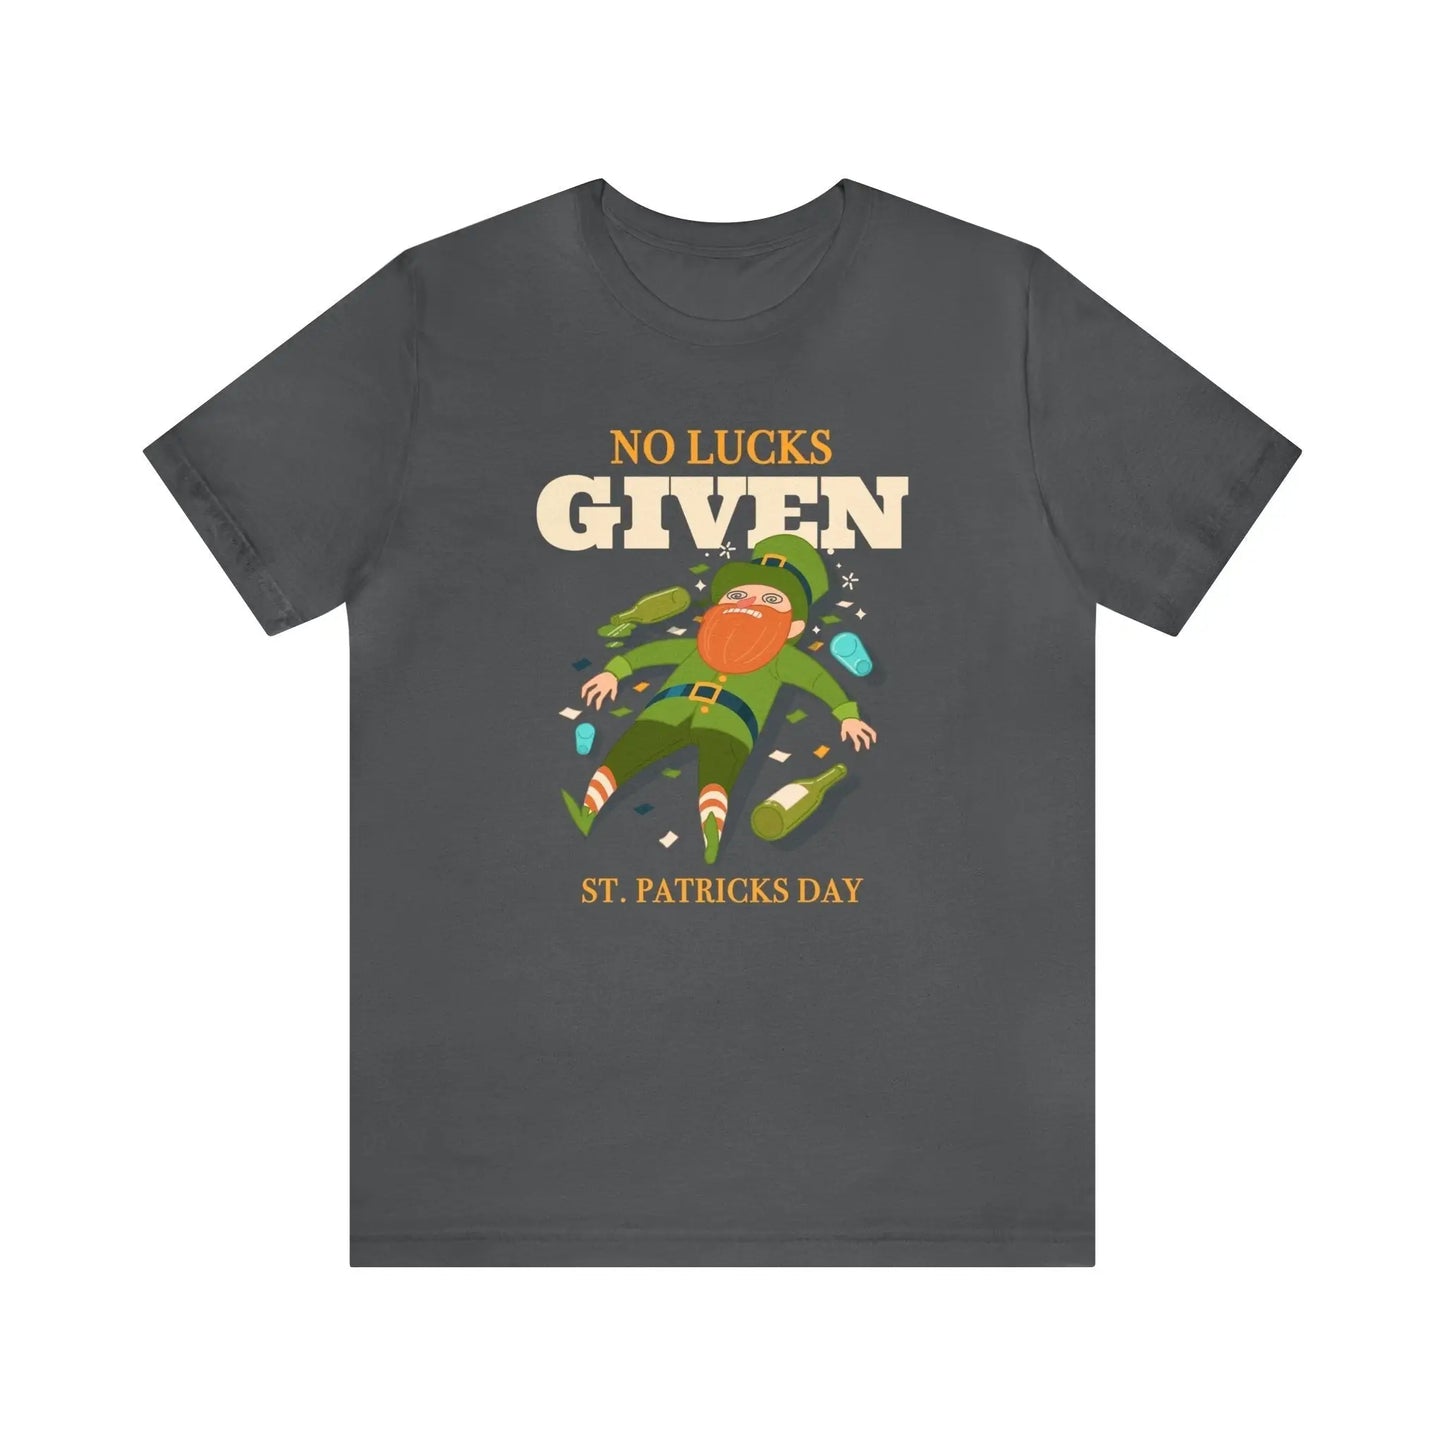 No Lucks Given Men's Tee - Wicked Tees